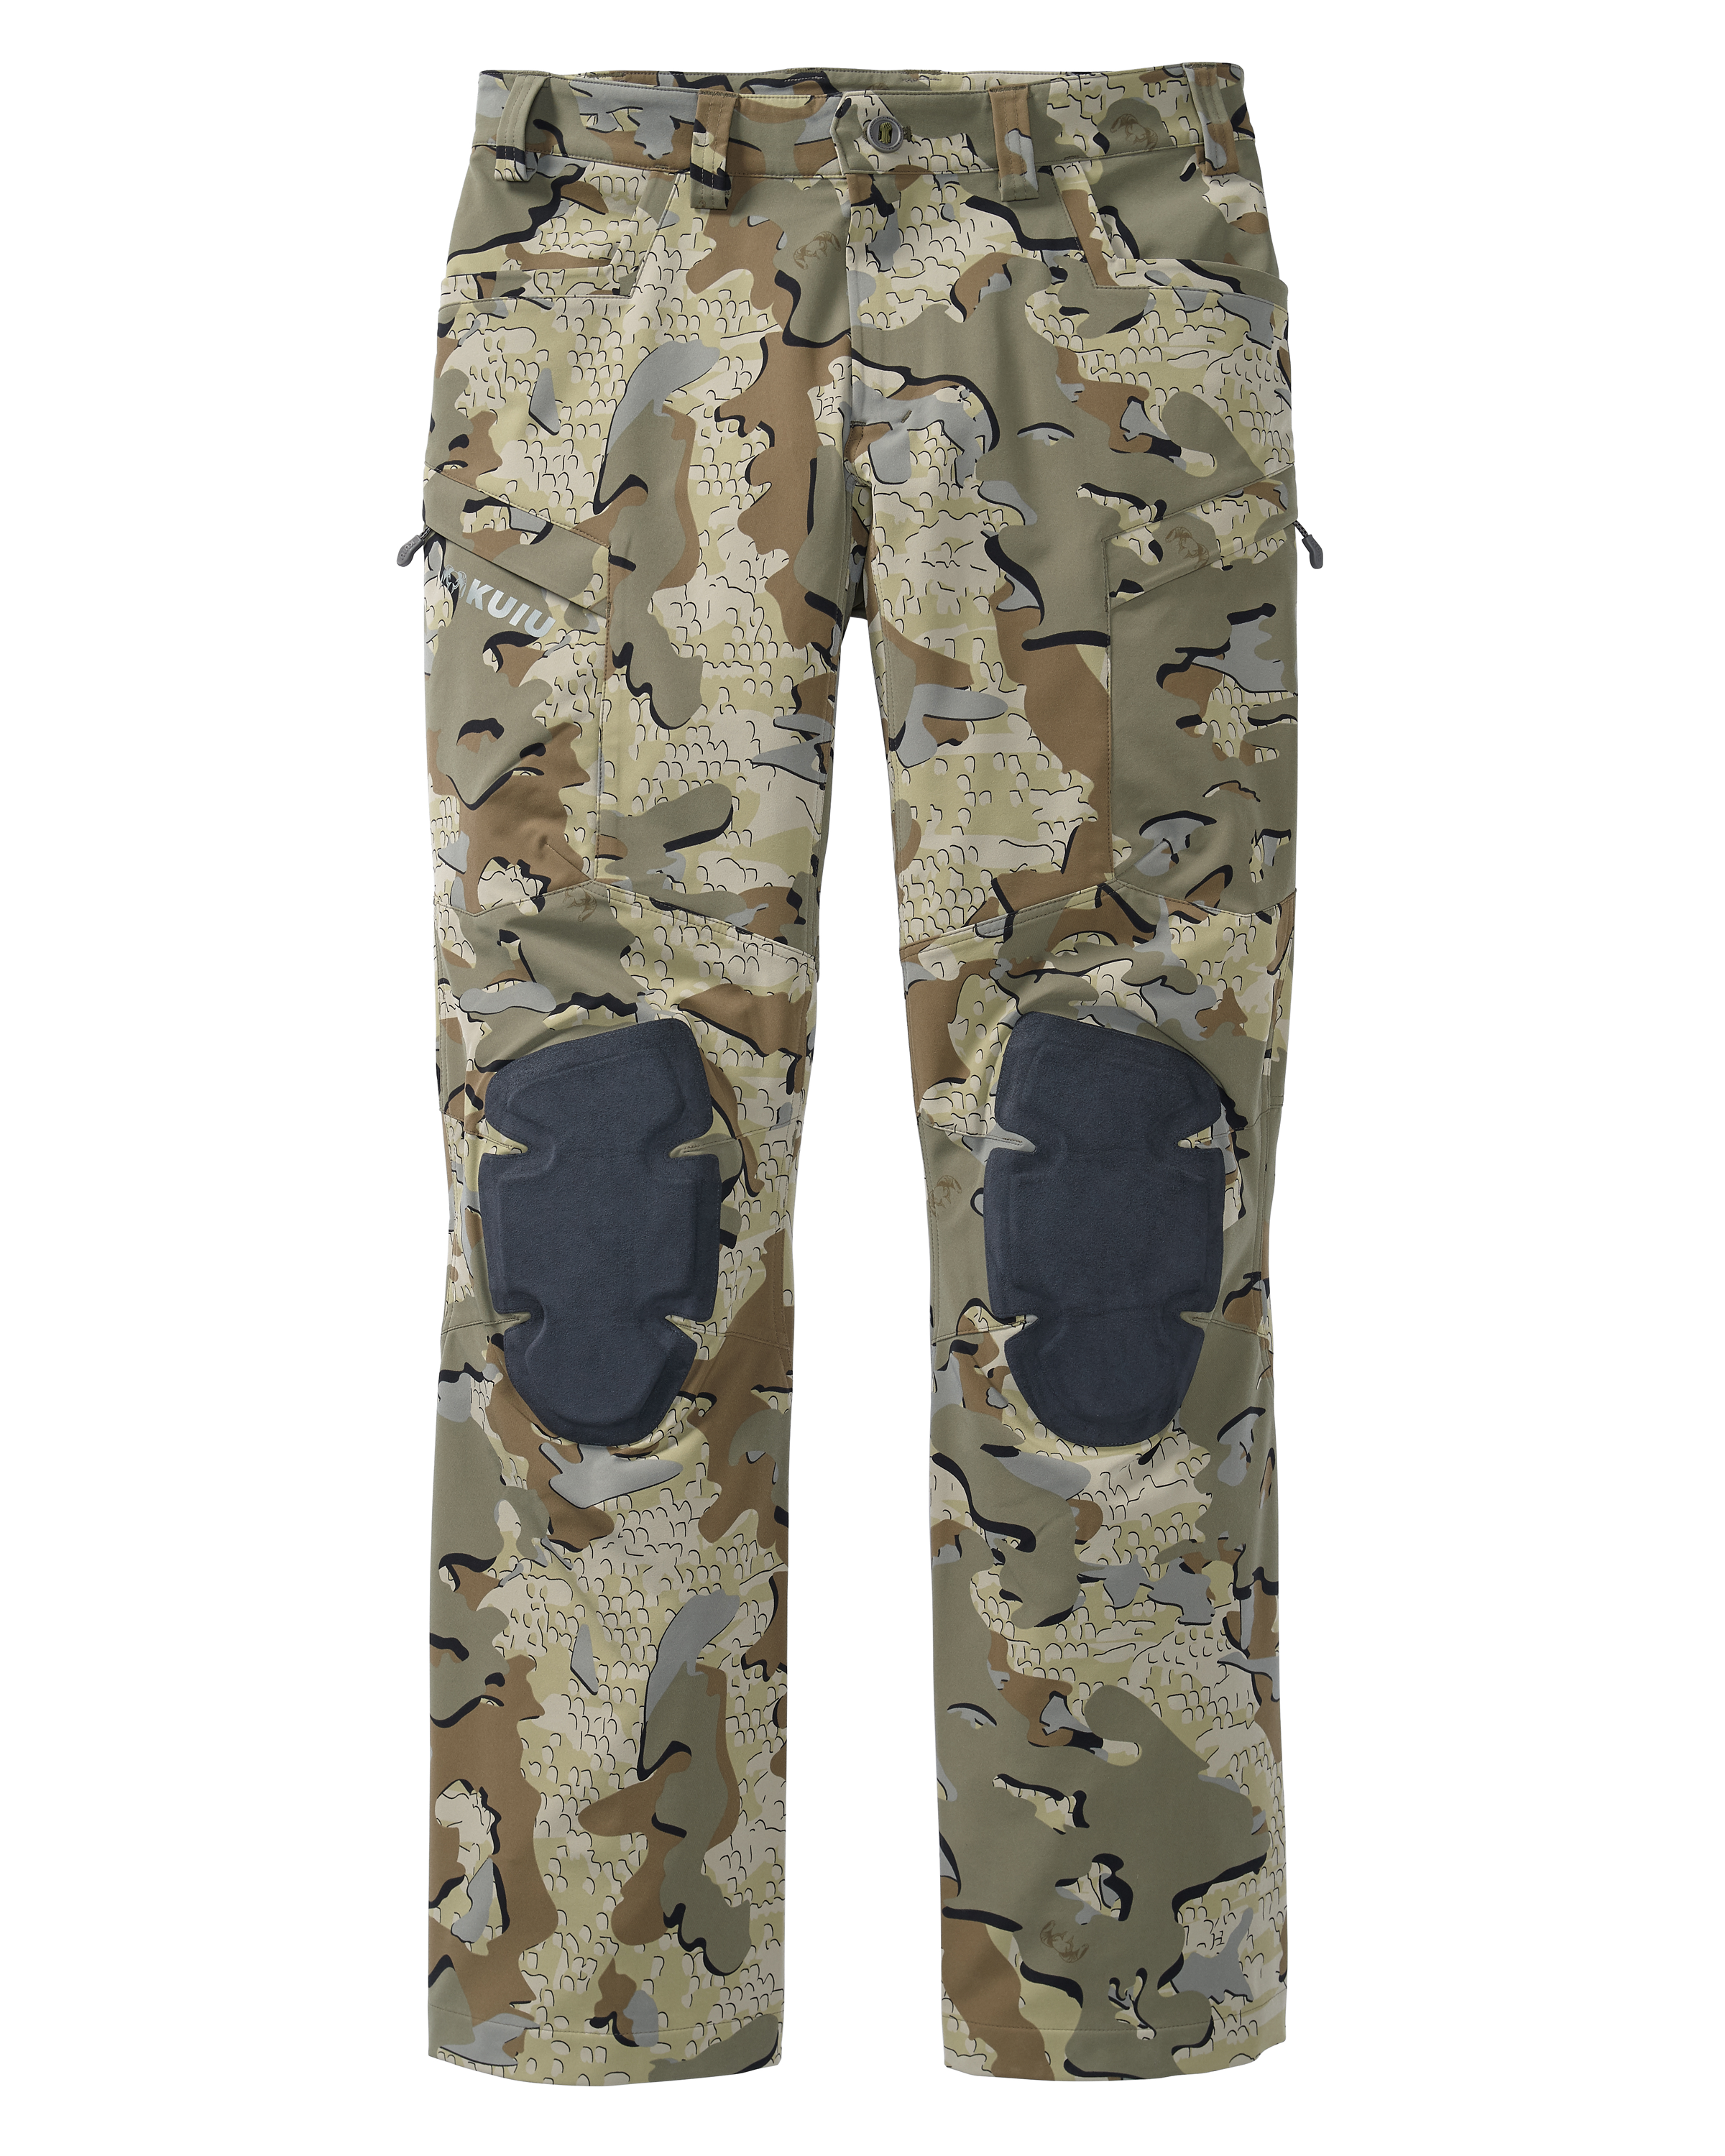 KUIU PRO Hunting Pant in Valo | Size 30